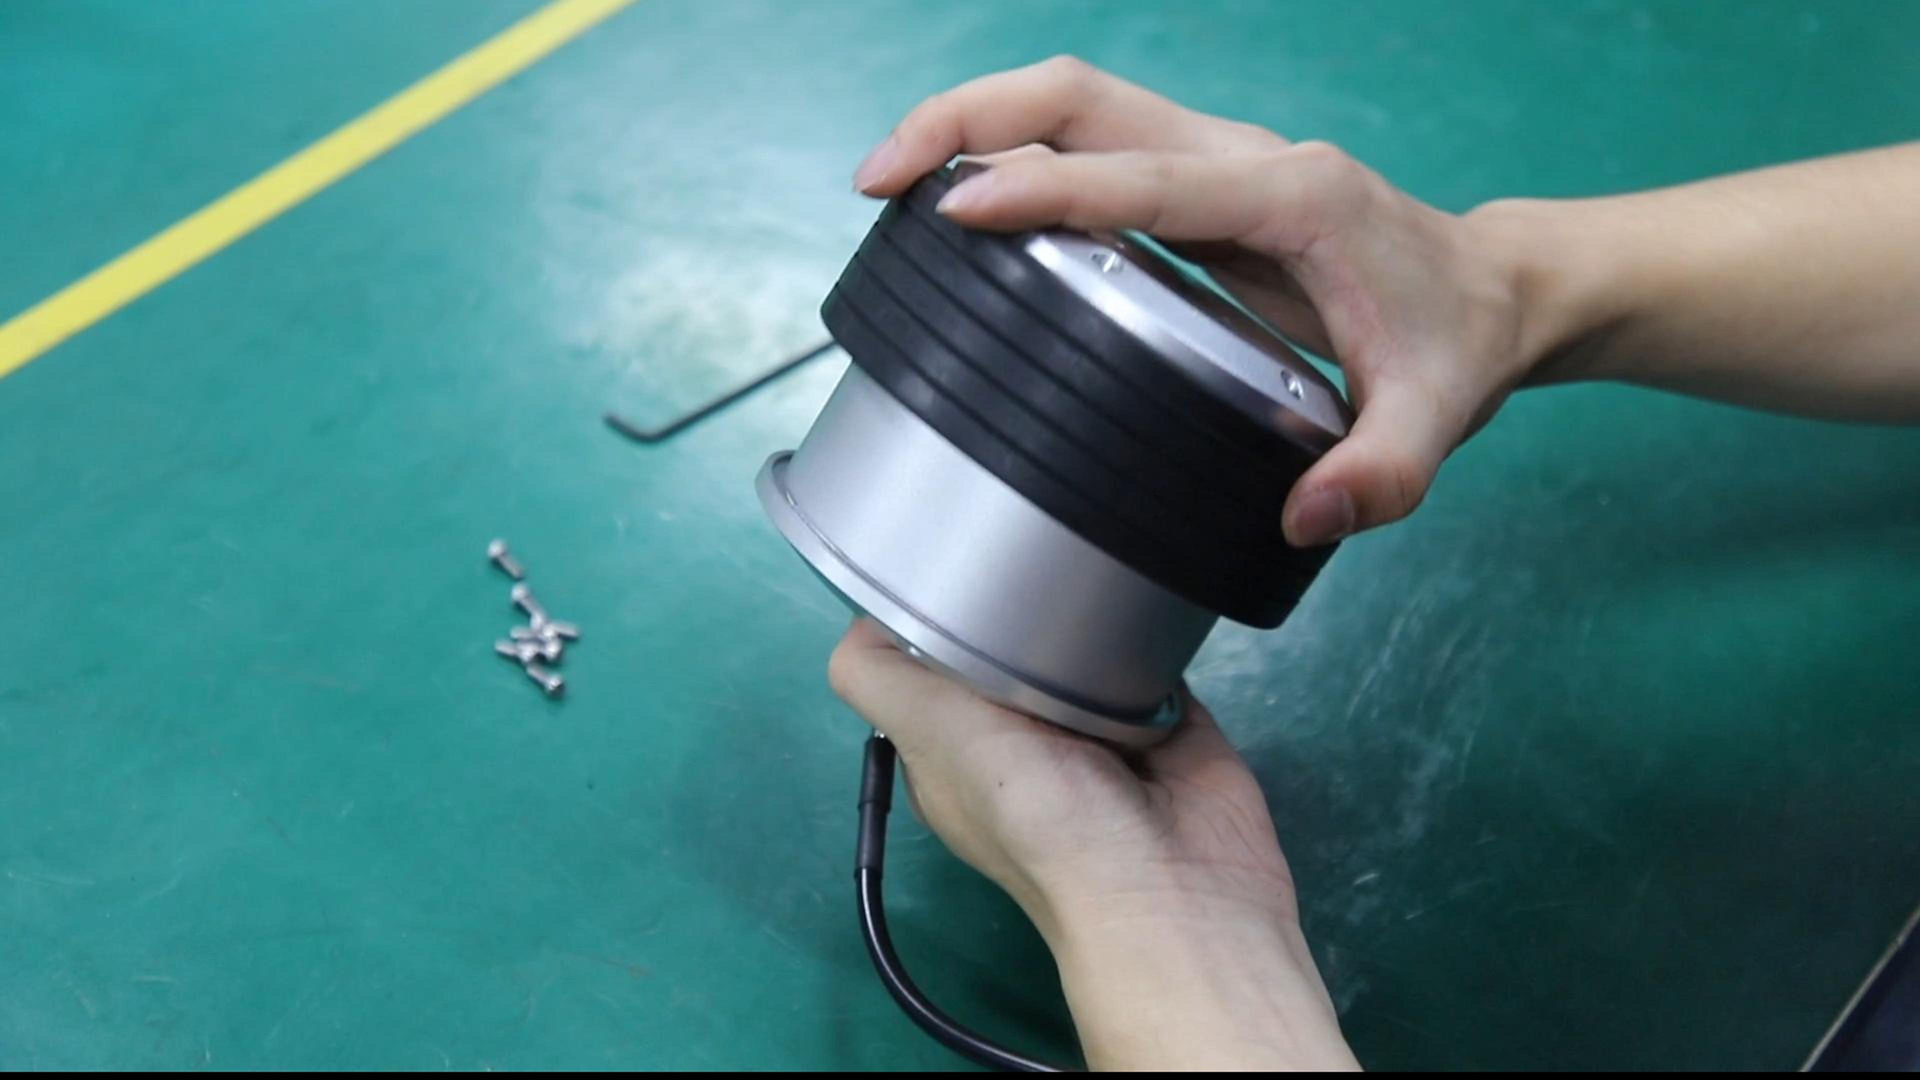 Application of a detachable tire in an outer rotor hub motor